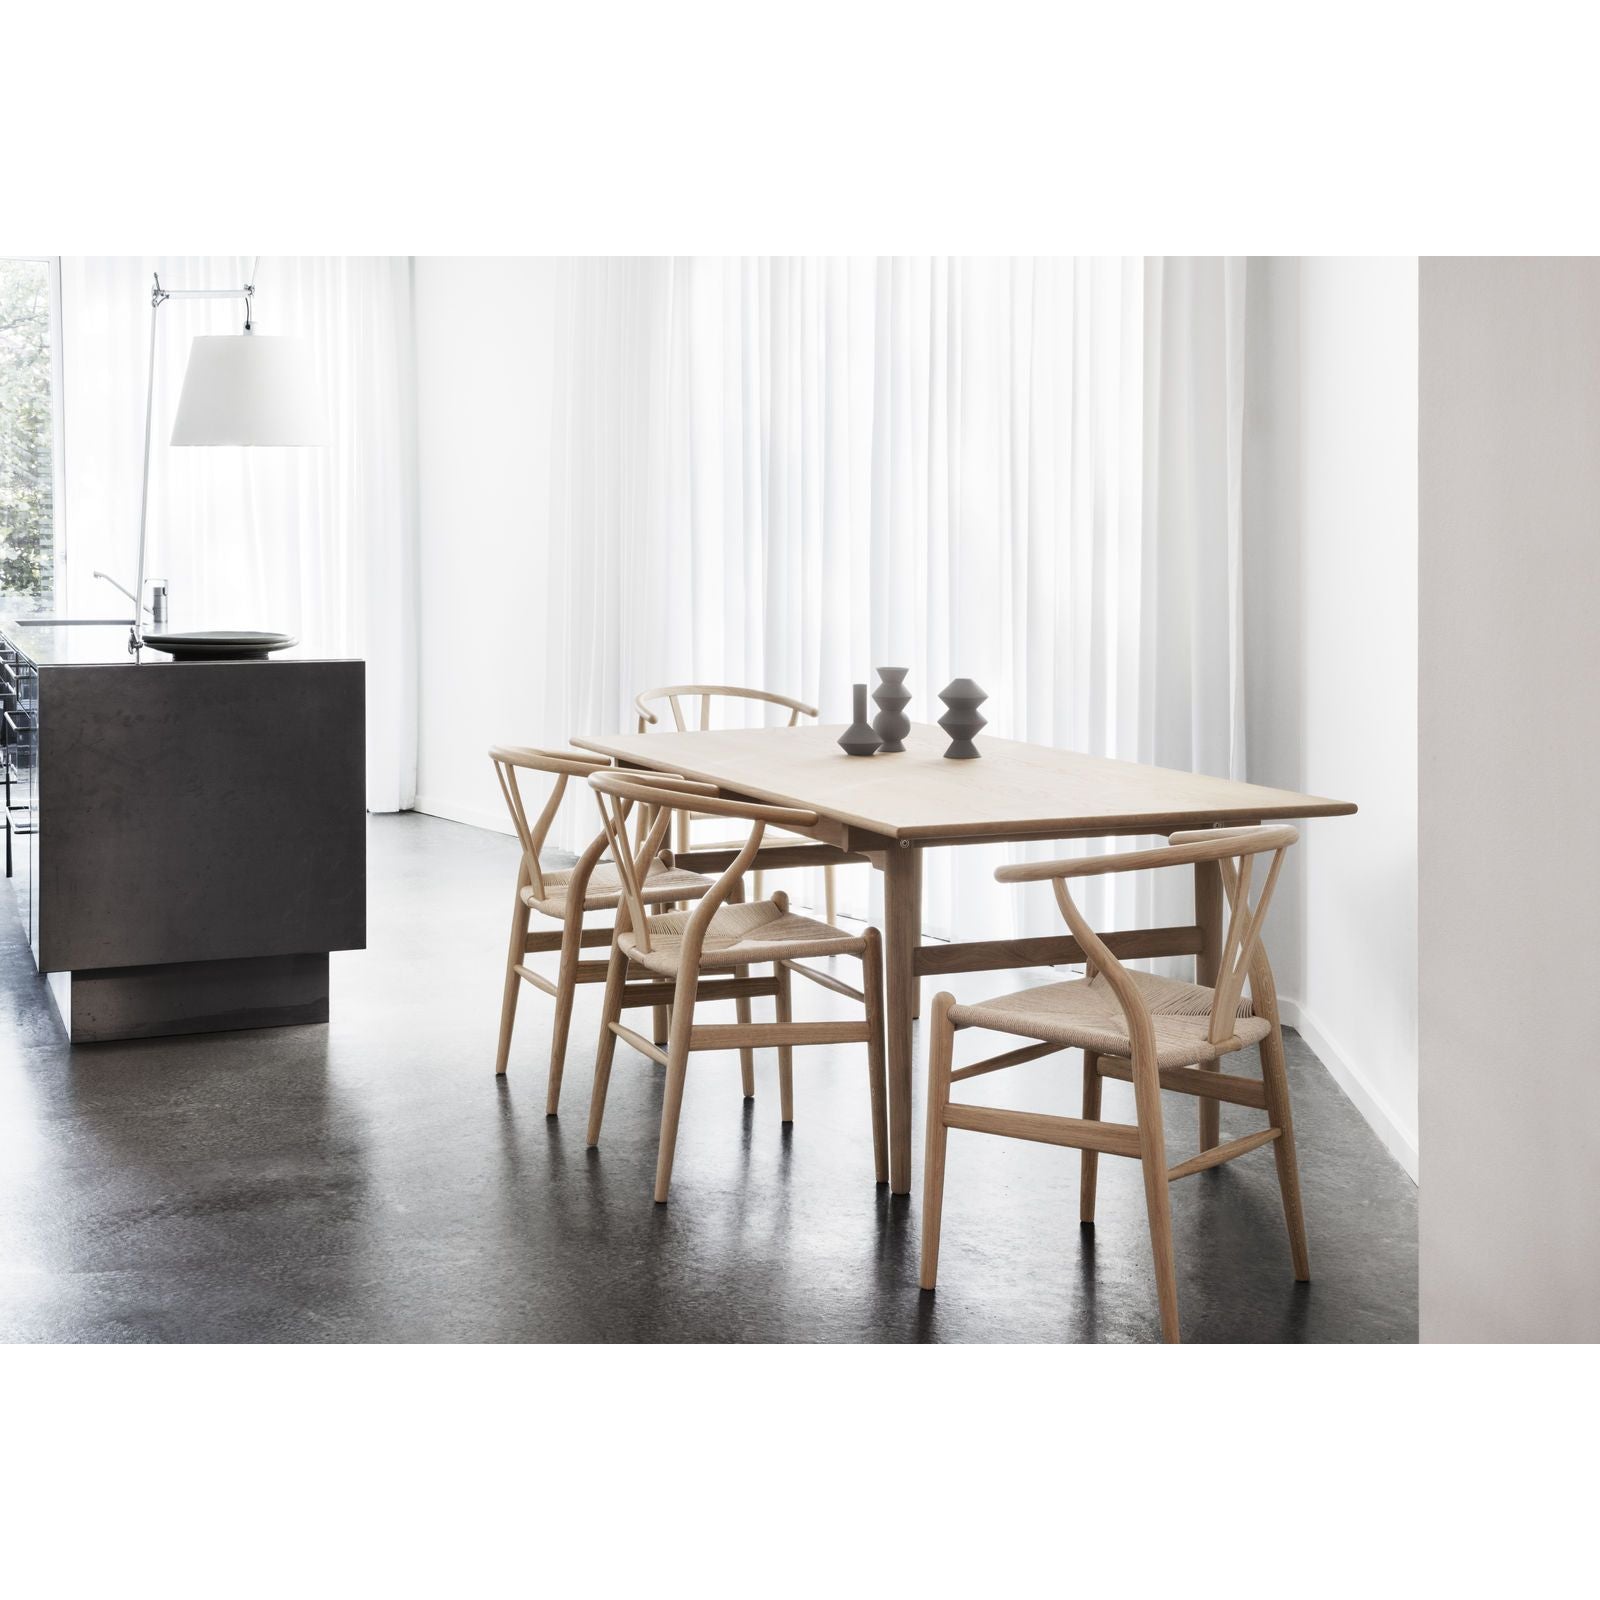 Carl Hansen Ch24 Wishbone Chair Natural Cord, Lacquered Beech Special Edition